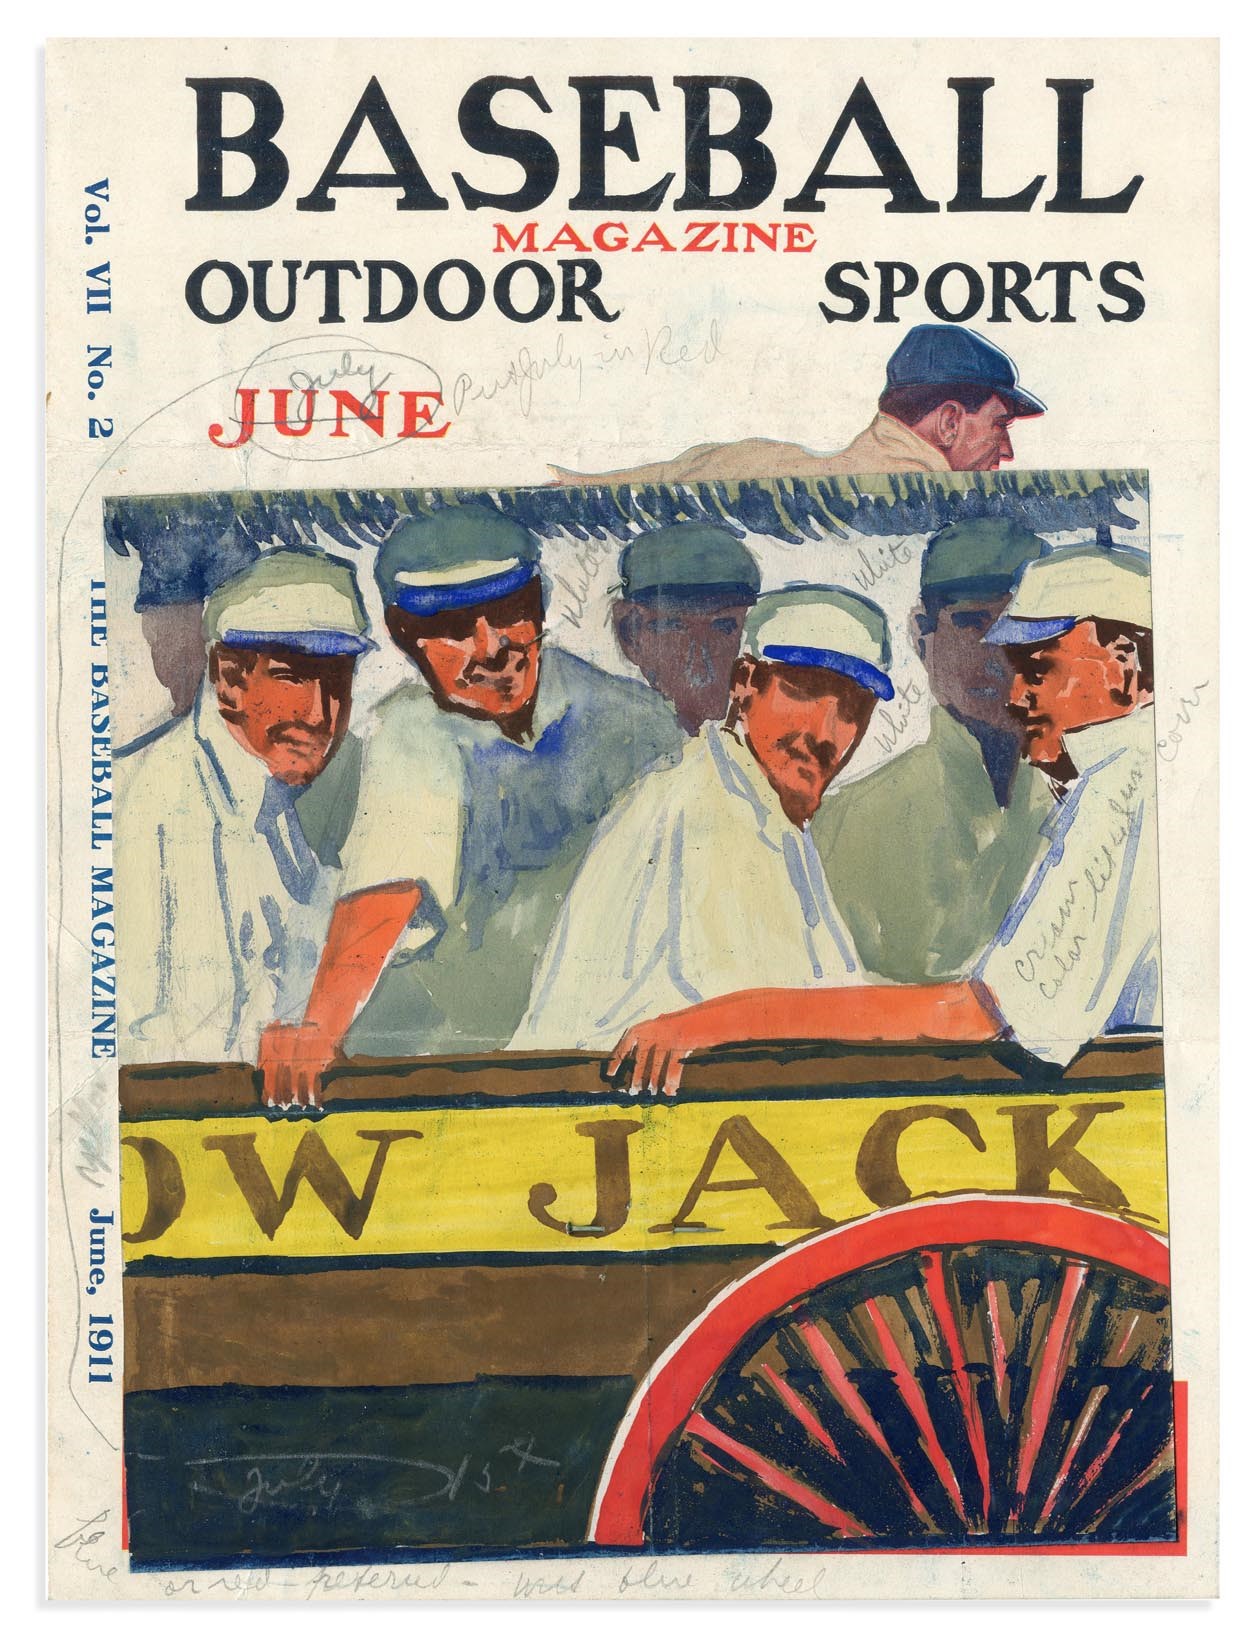 - August 1911 Baseball Magazine Cover Art Study Mounted on Rare Proof Cover by Gerrit Beneker (1882-1934)